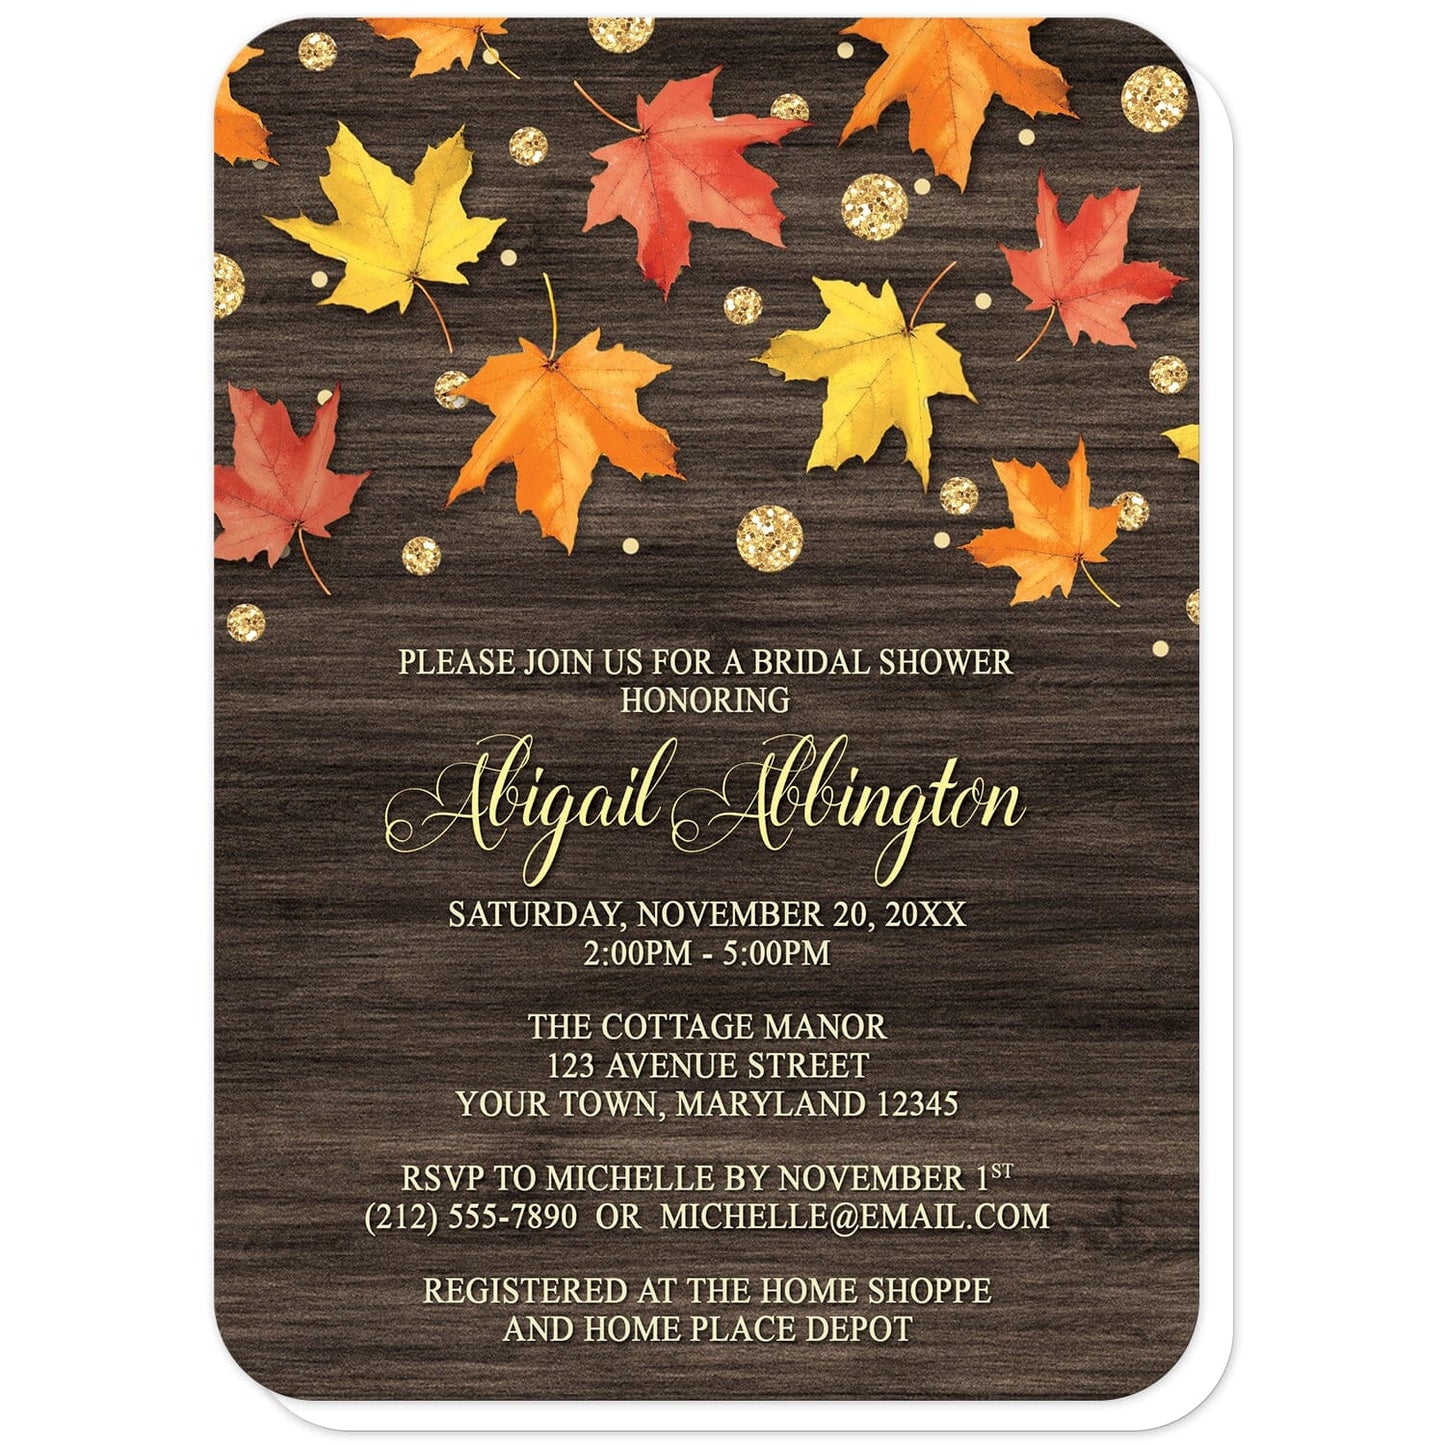 Falling Leaves with Gold Autumn Bridal Shower Invitations (with rounded corners) at Artistically Invited. Beautiful rustic falling leaves with gold autumn bridal shower invitations with red, orange, and yellow leaves scattered and falling along the top, coupled with gold-colored glitter-illustrated circles, over a dark brown wood background. Your personalized bridal shower celebration details are custom printed in a very light yellow and gold over the wood background.